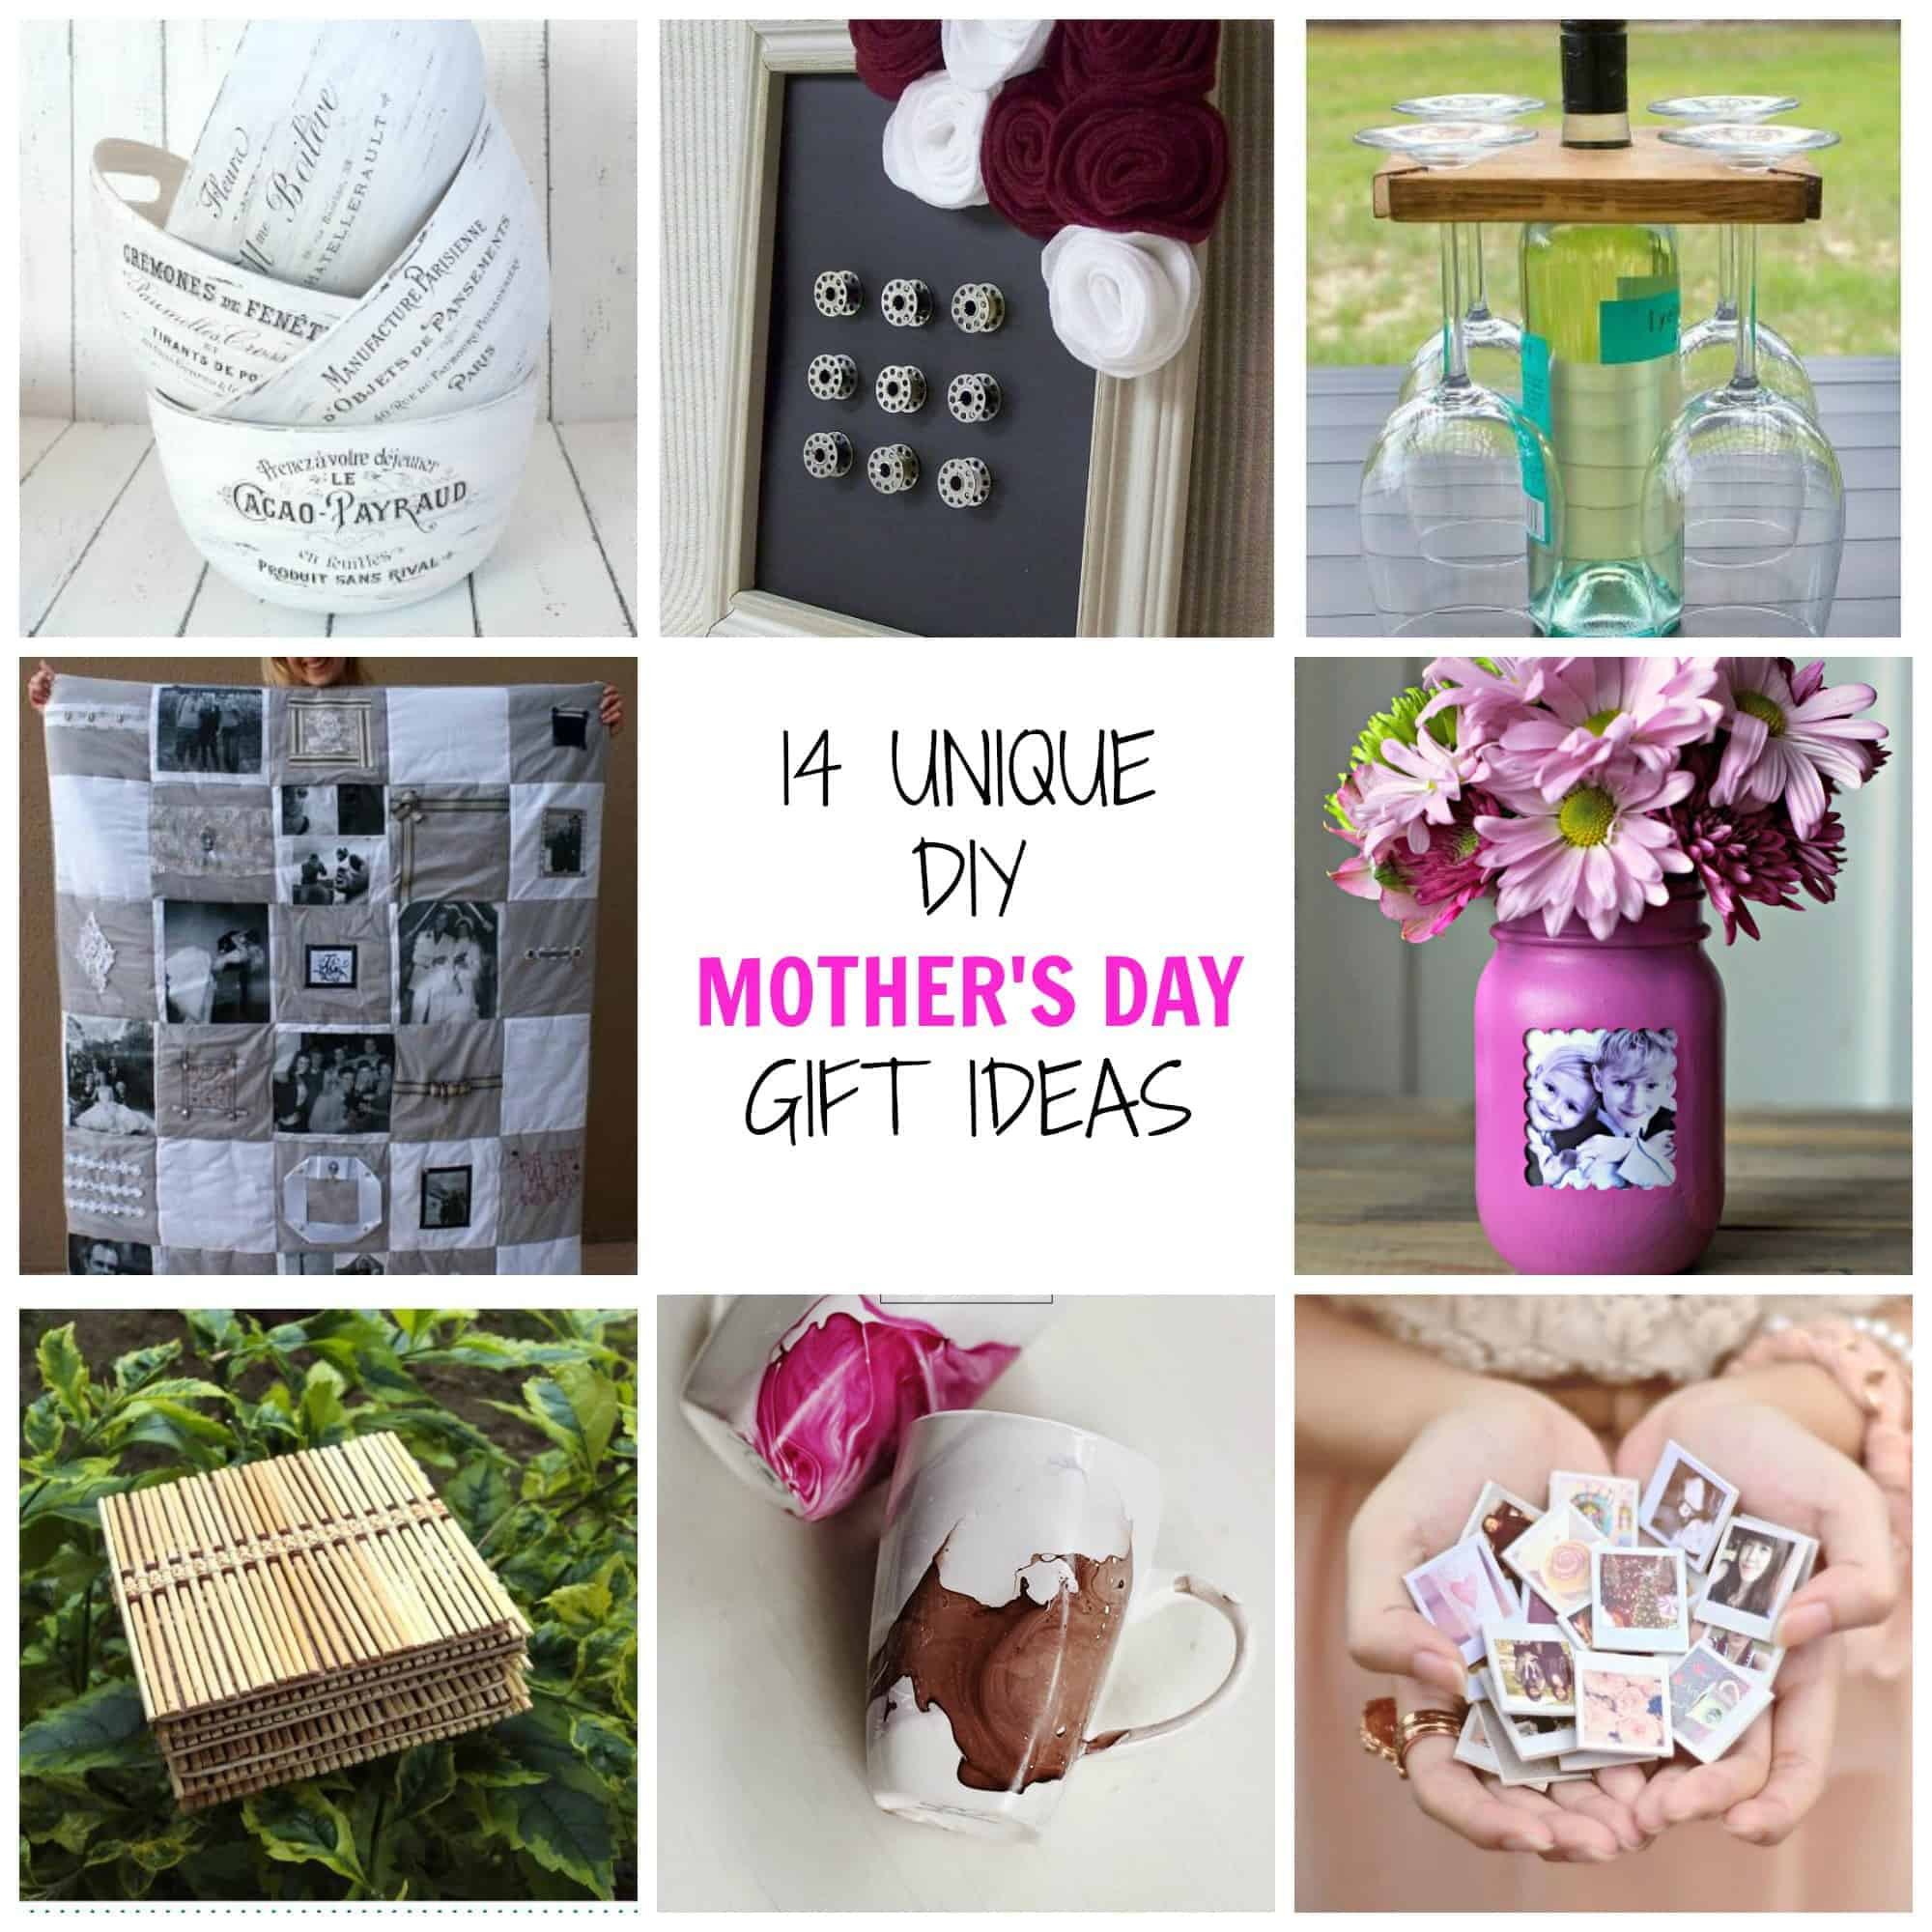 Mothers Day Gift Ideas DIY
 14 Unique DIY Mother s Day Gifts Simplify Create Inspire